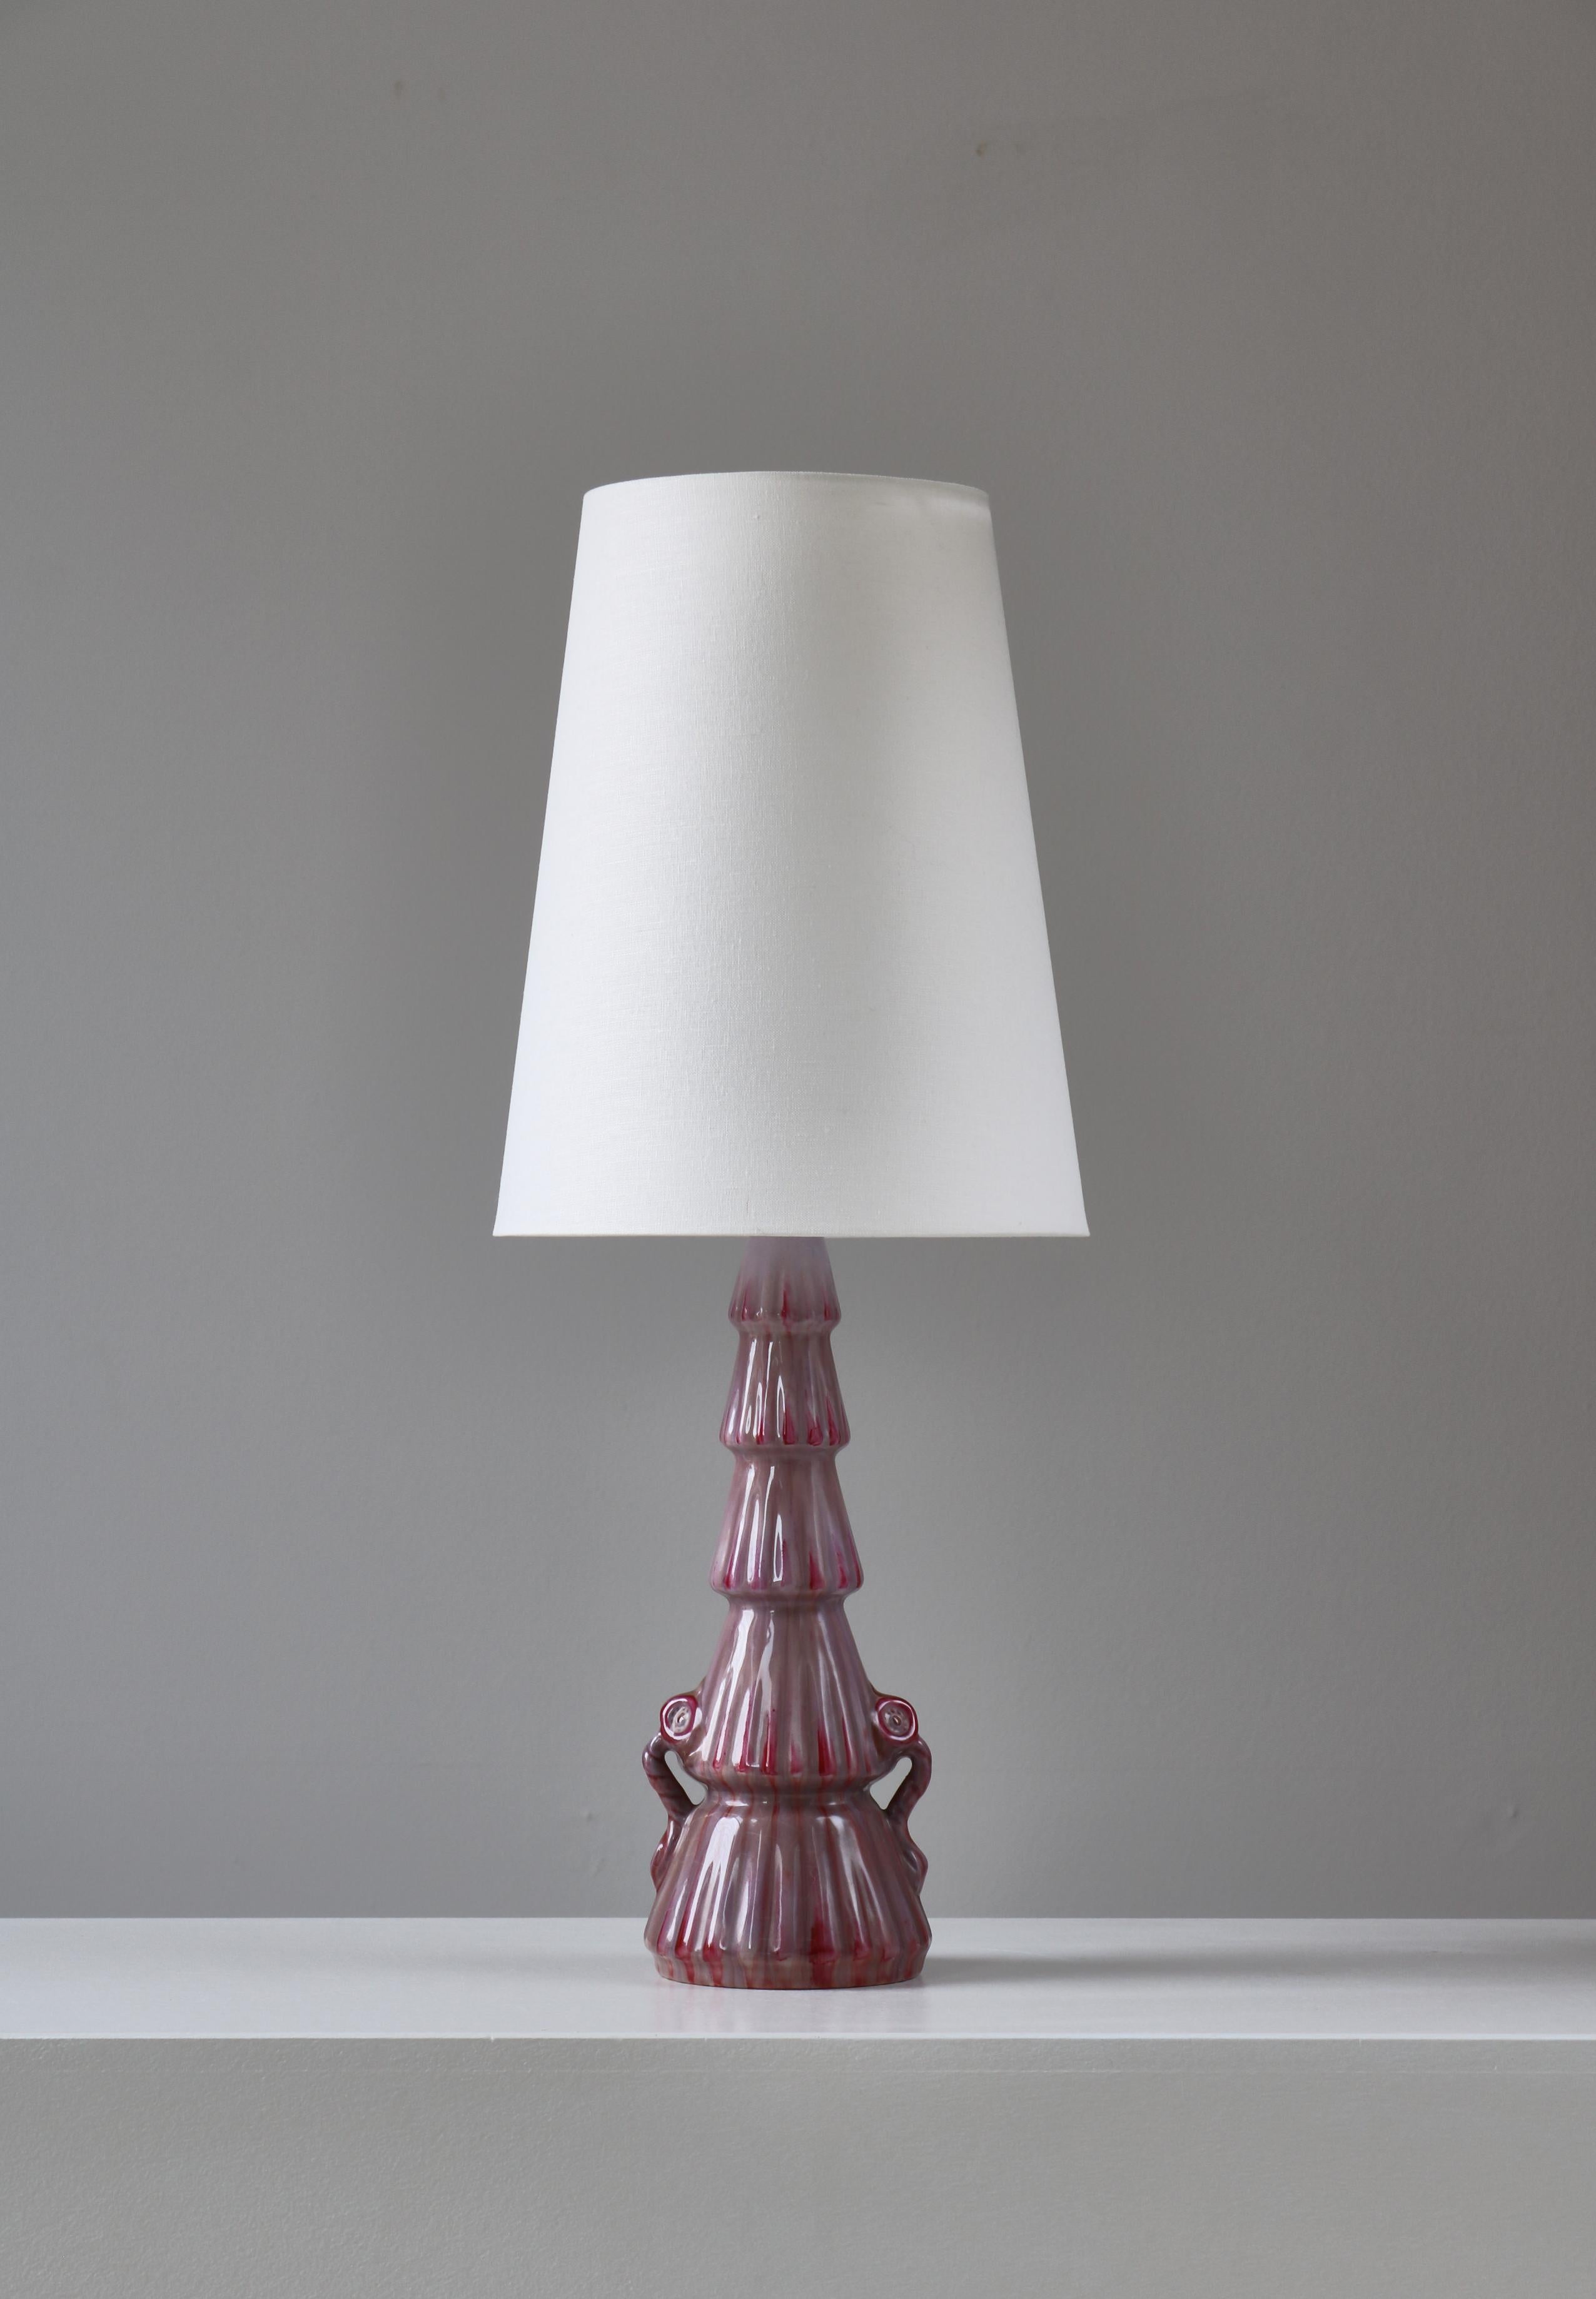 Wonderful and unique table lamp made by Swedish artist Louise Adelborg in the 1920s at the 